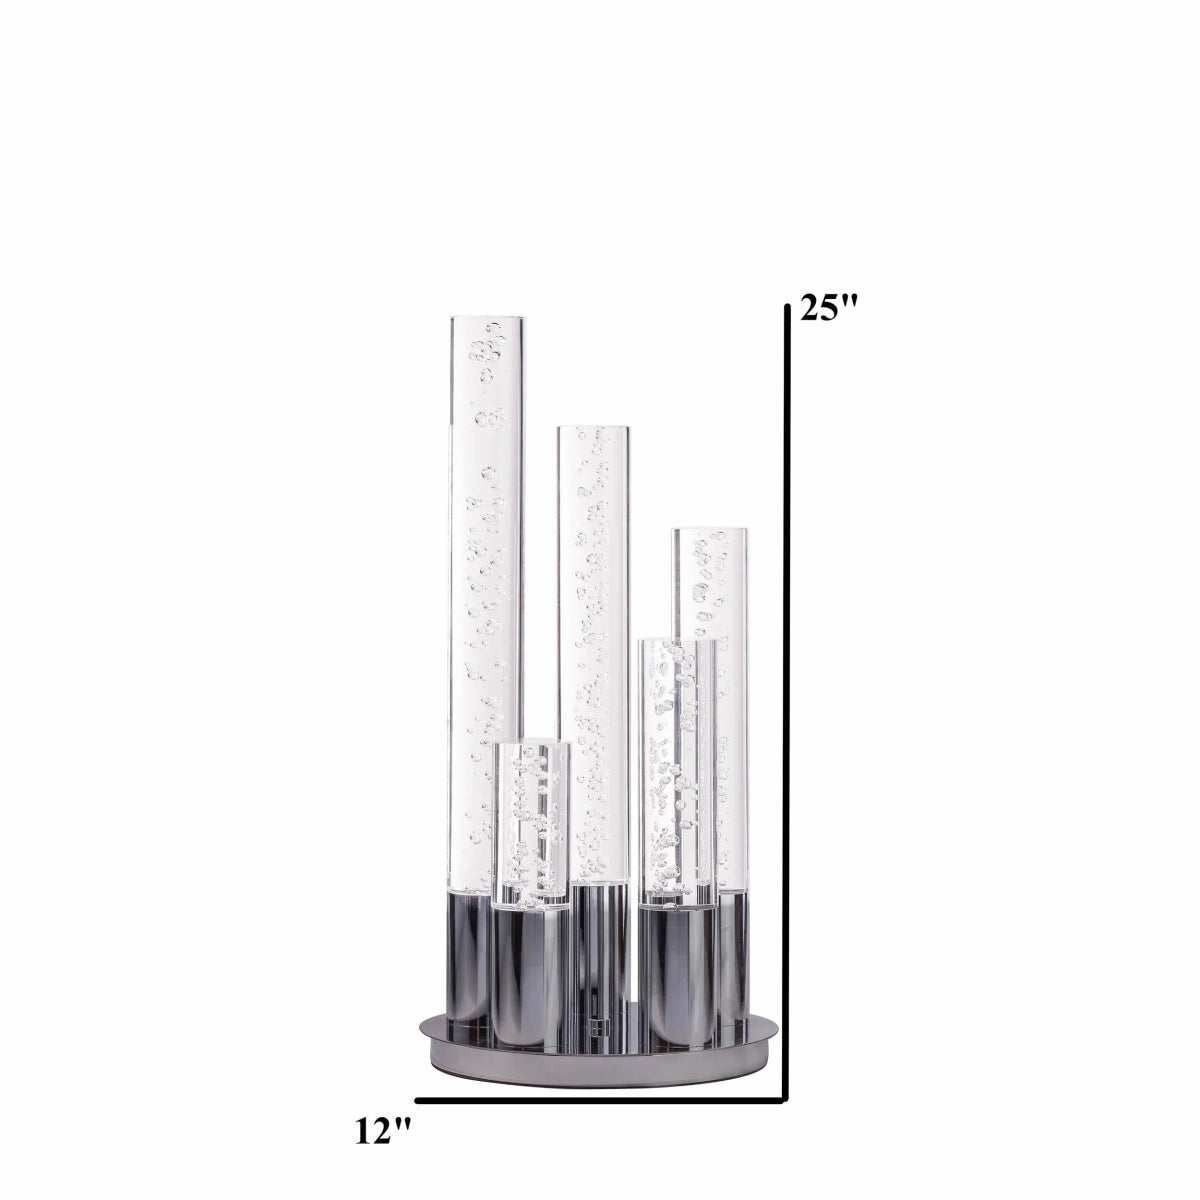 Measurement of Acrylic Cylinder Dimmable Table Lamp